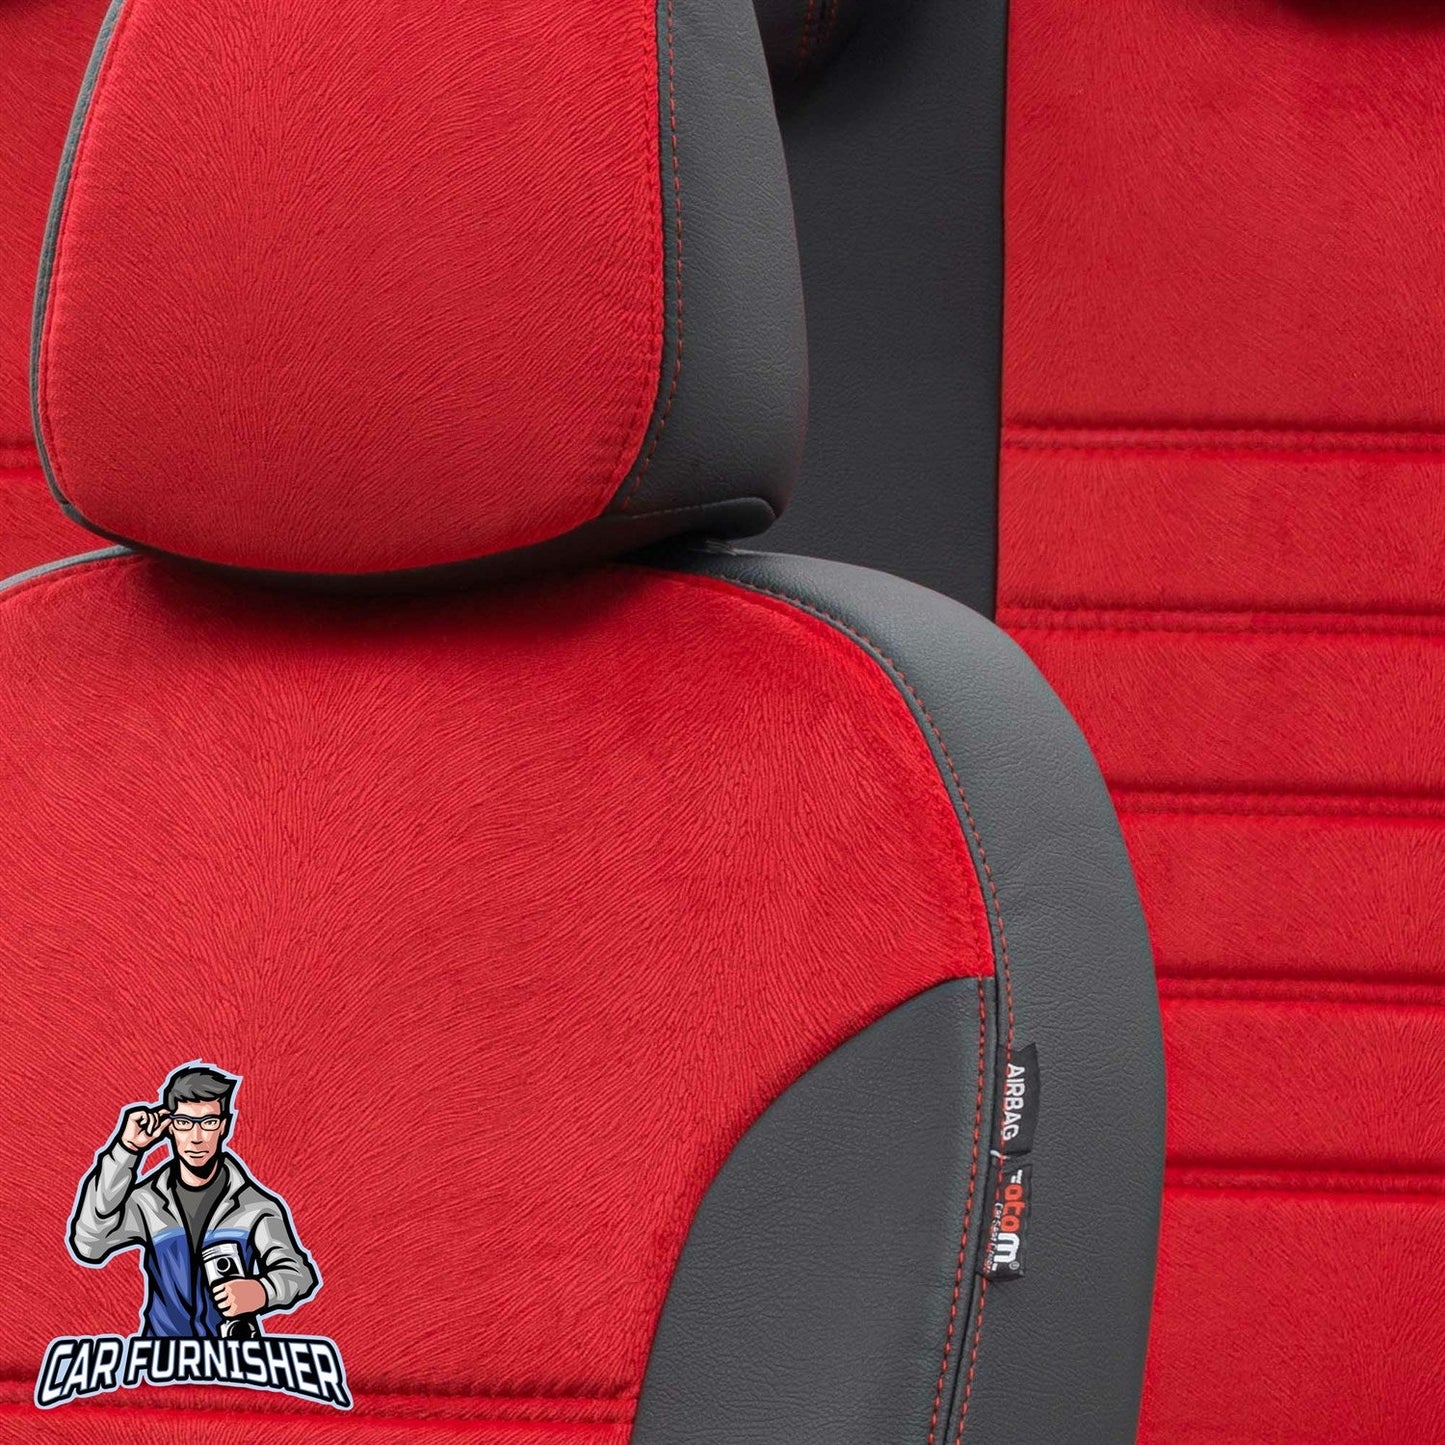 Volkswagen Caddy Seat Cover London Foal Feather Design Red Leather & Foal Feather